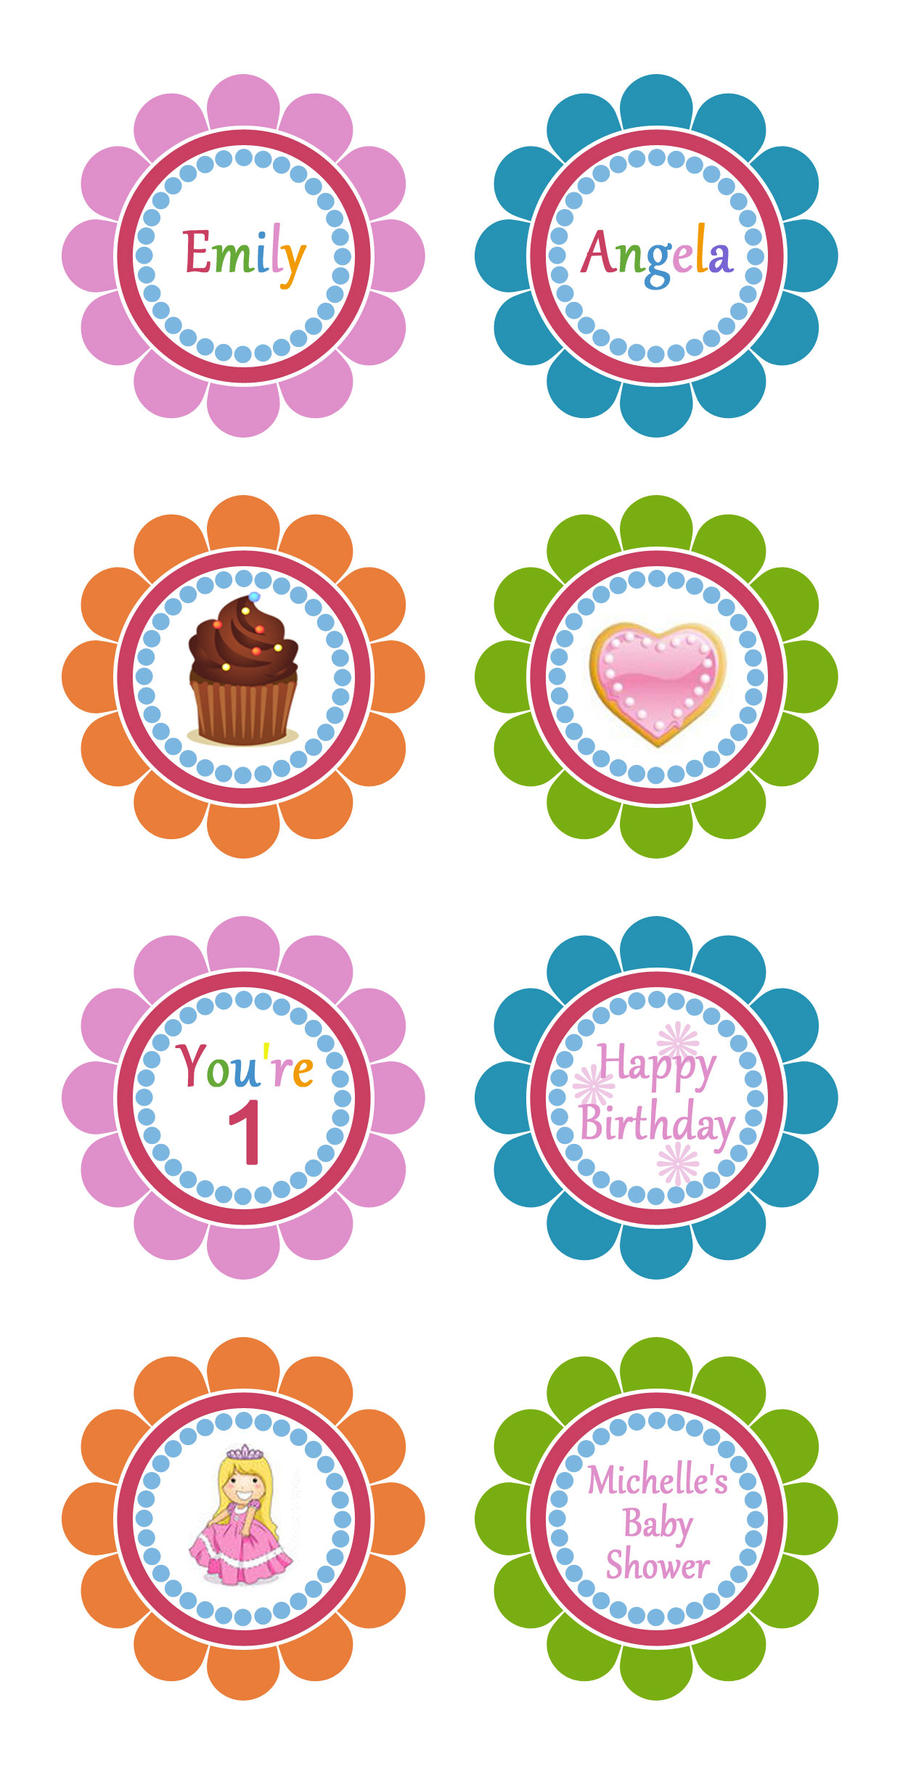 Cupcake Toppers Template by danbradster on DeviantArt